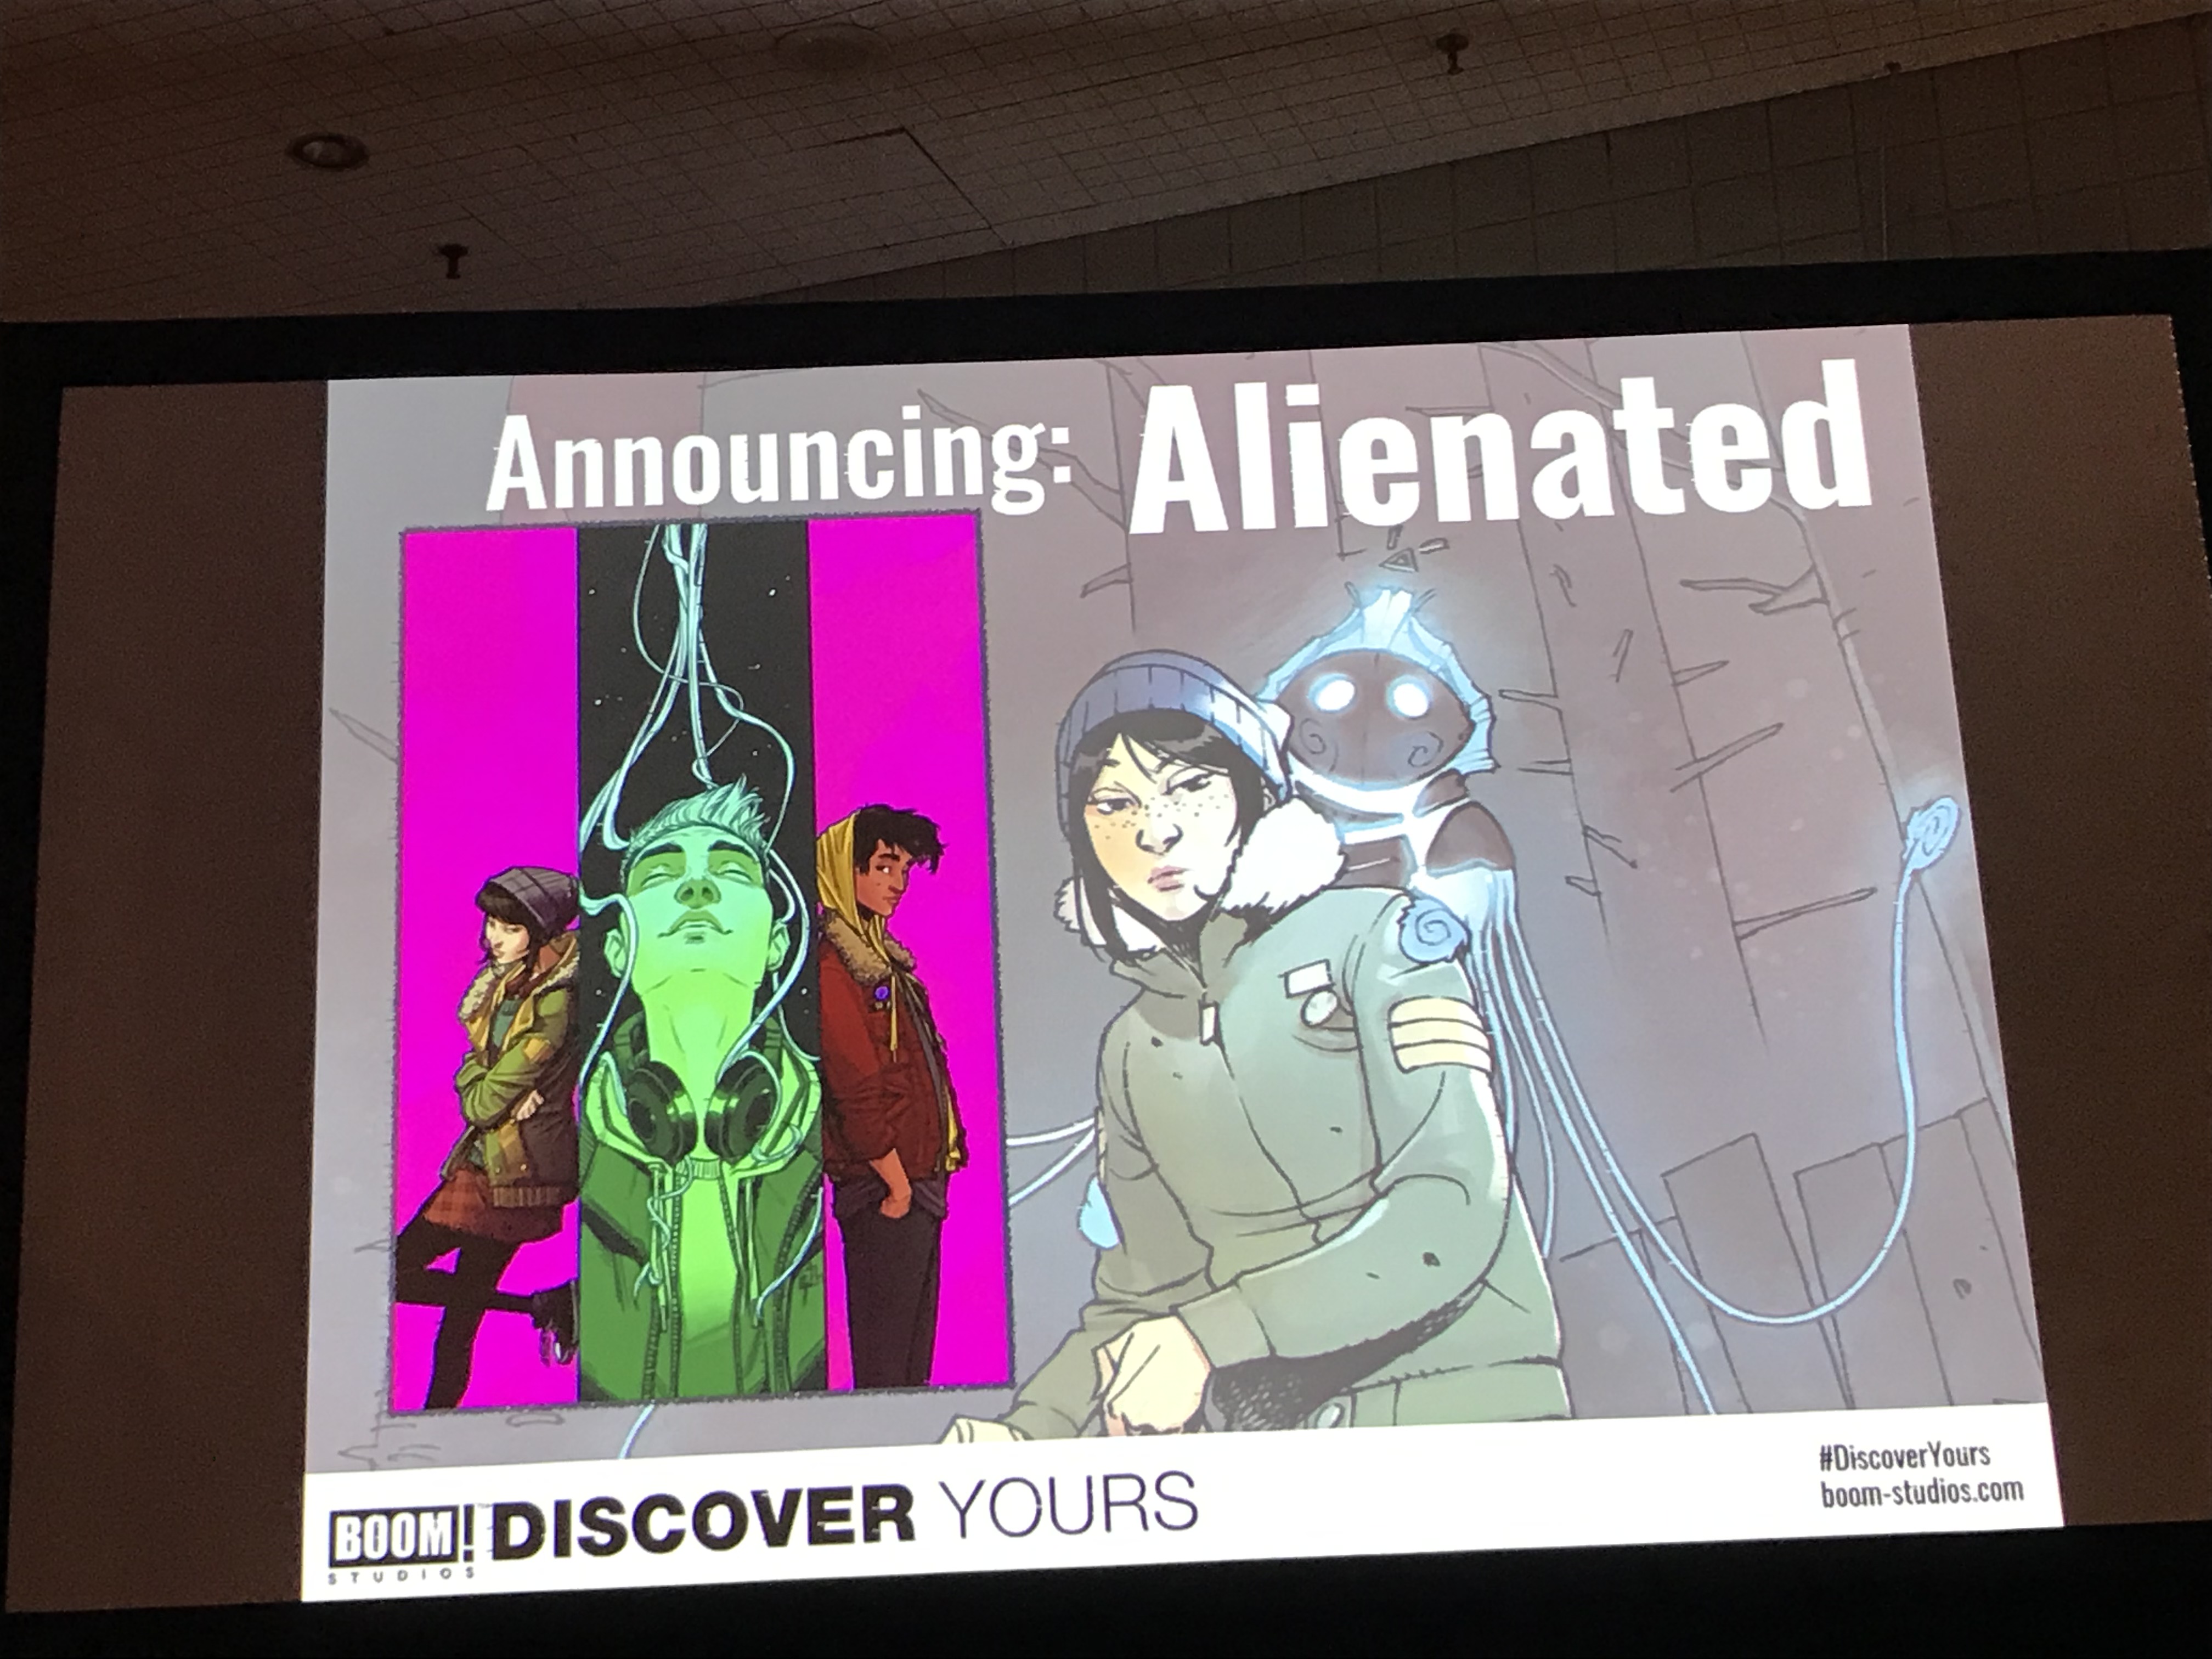 NYCC '19: Simon Spurrier talks about his new book 'Alienated' from BOOM! Studios